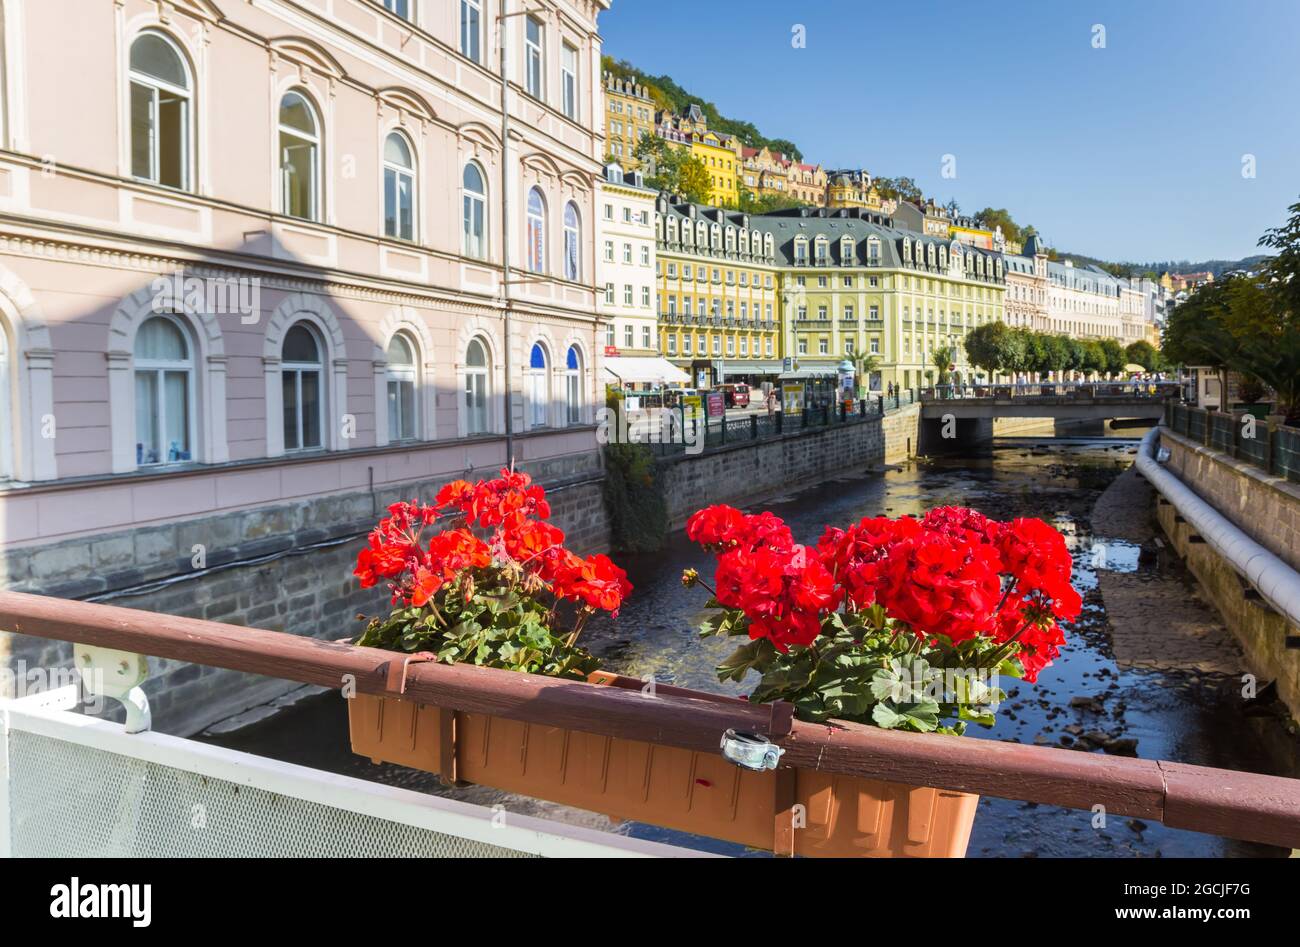 Red flowers on the bridge in the historic center of Karlovy Vary, Czech Republic Stock Photo